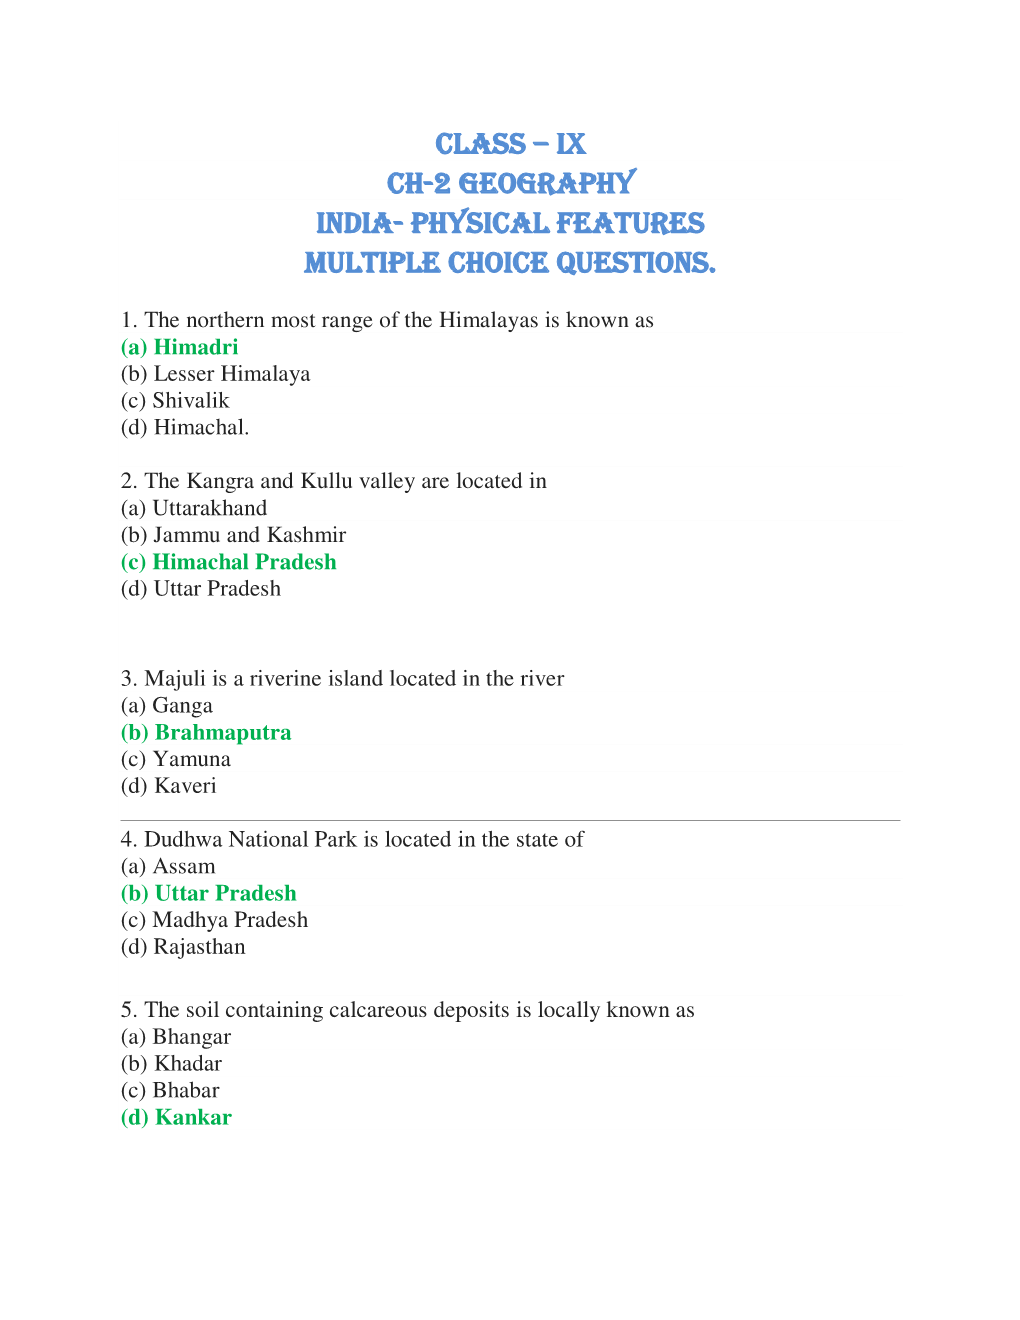 CLASS – IX CH-2 Geography INDIA- PHYSICAL FEATURES Multiple Choice Questions